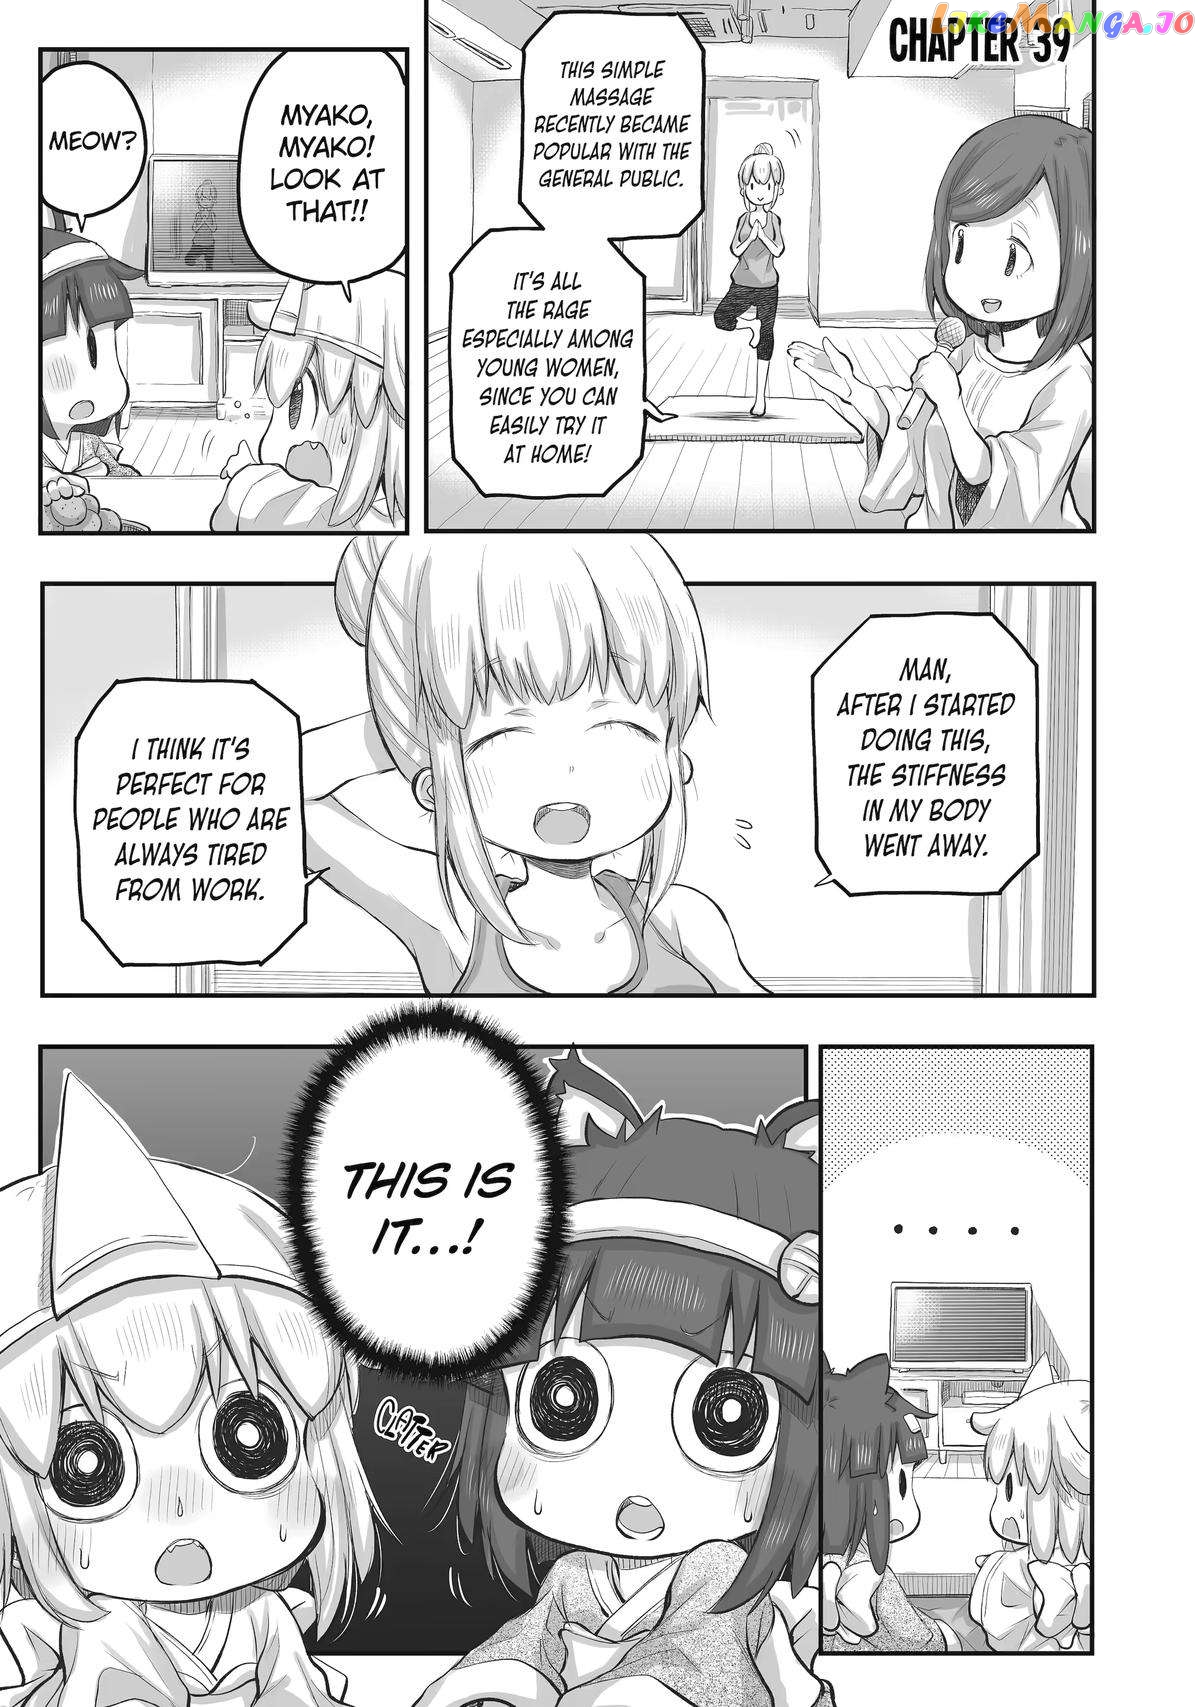 Ms. Corporate Slave Wants to be Healed by a Loli Spirit - chapter 39 - #1